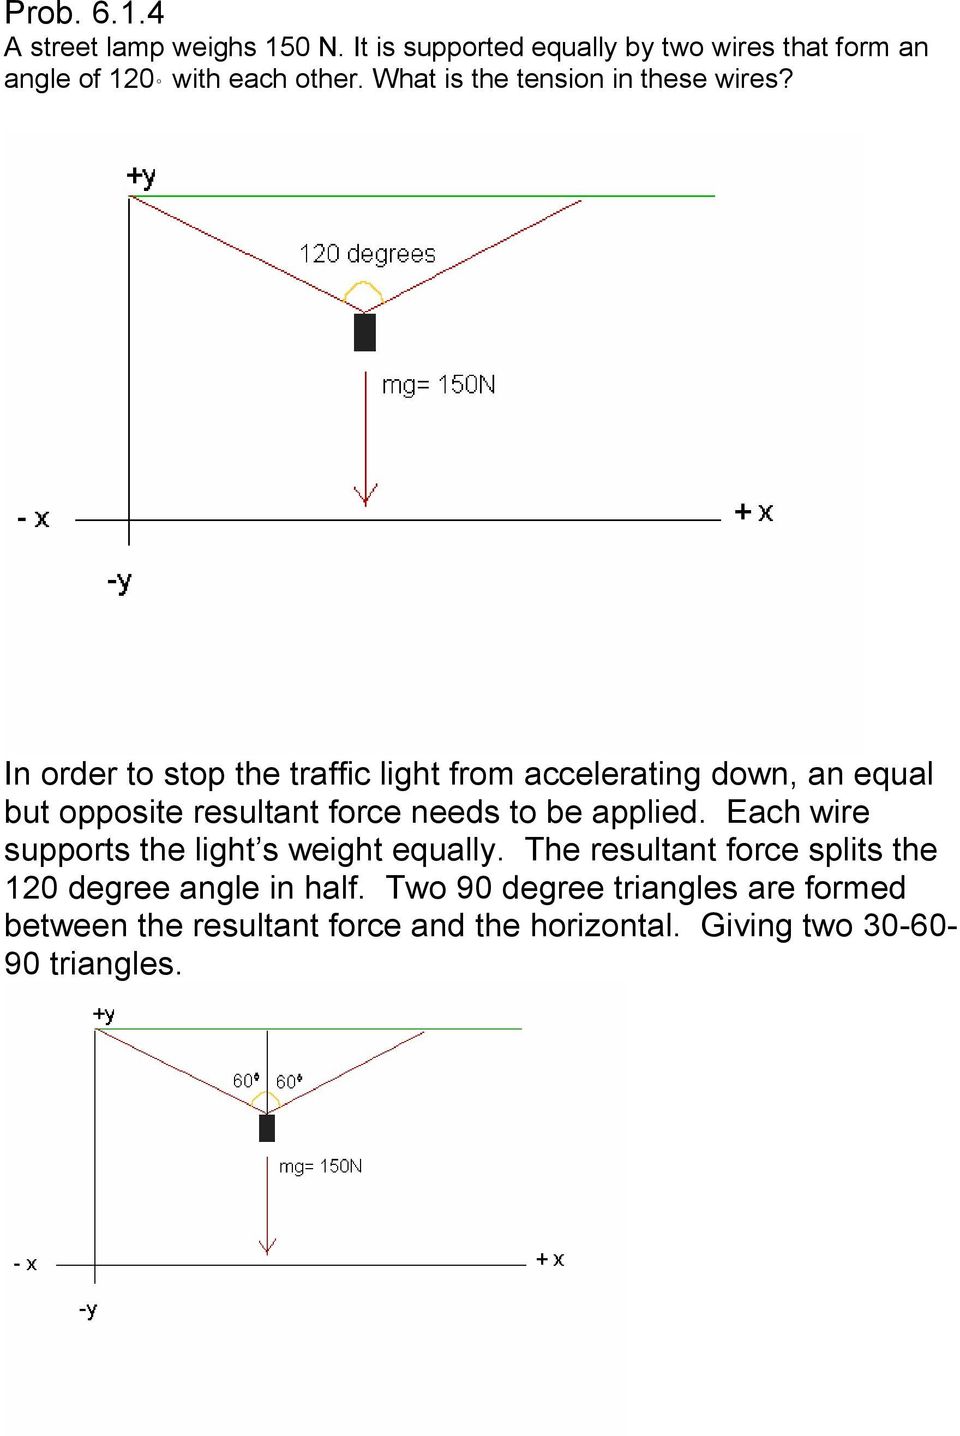 In order to stop the traffic light from accelerating down, an equal but opposite resultant force needs to be applied.